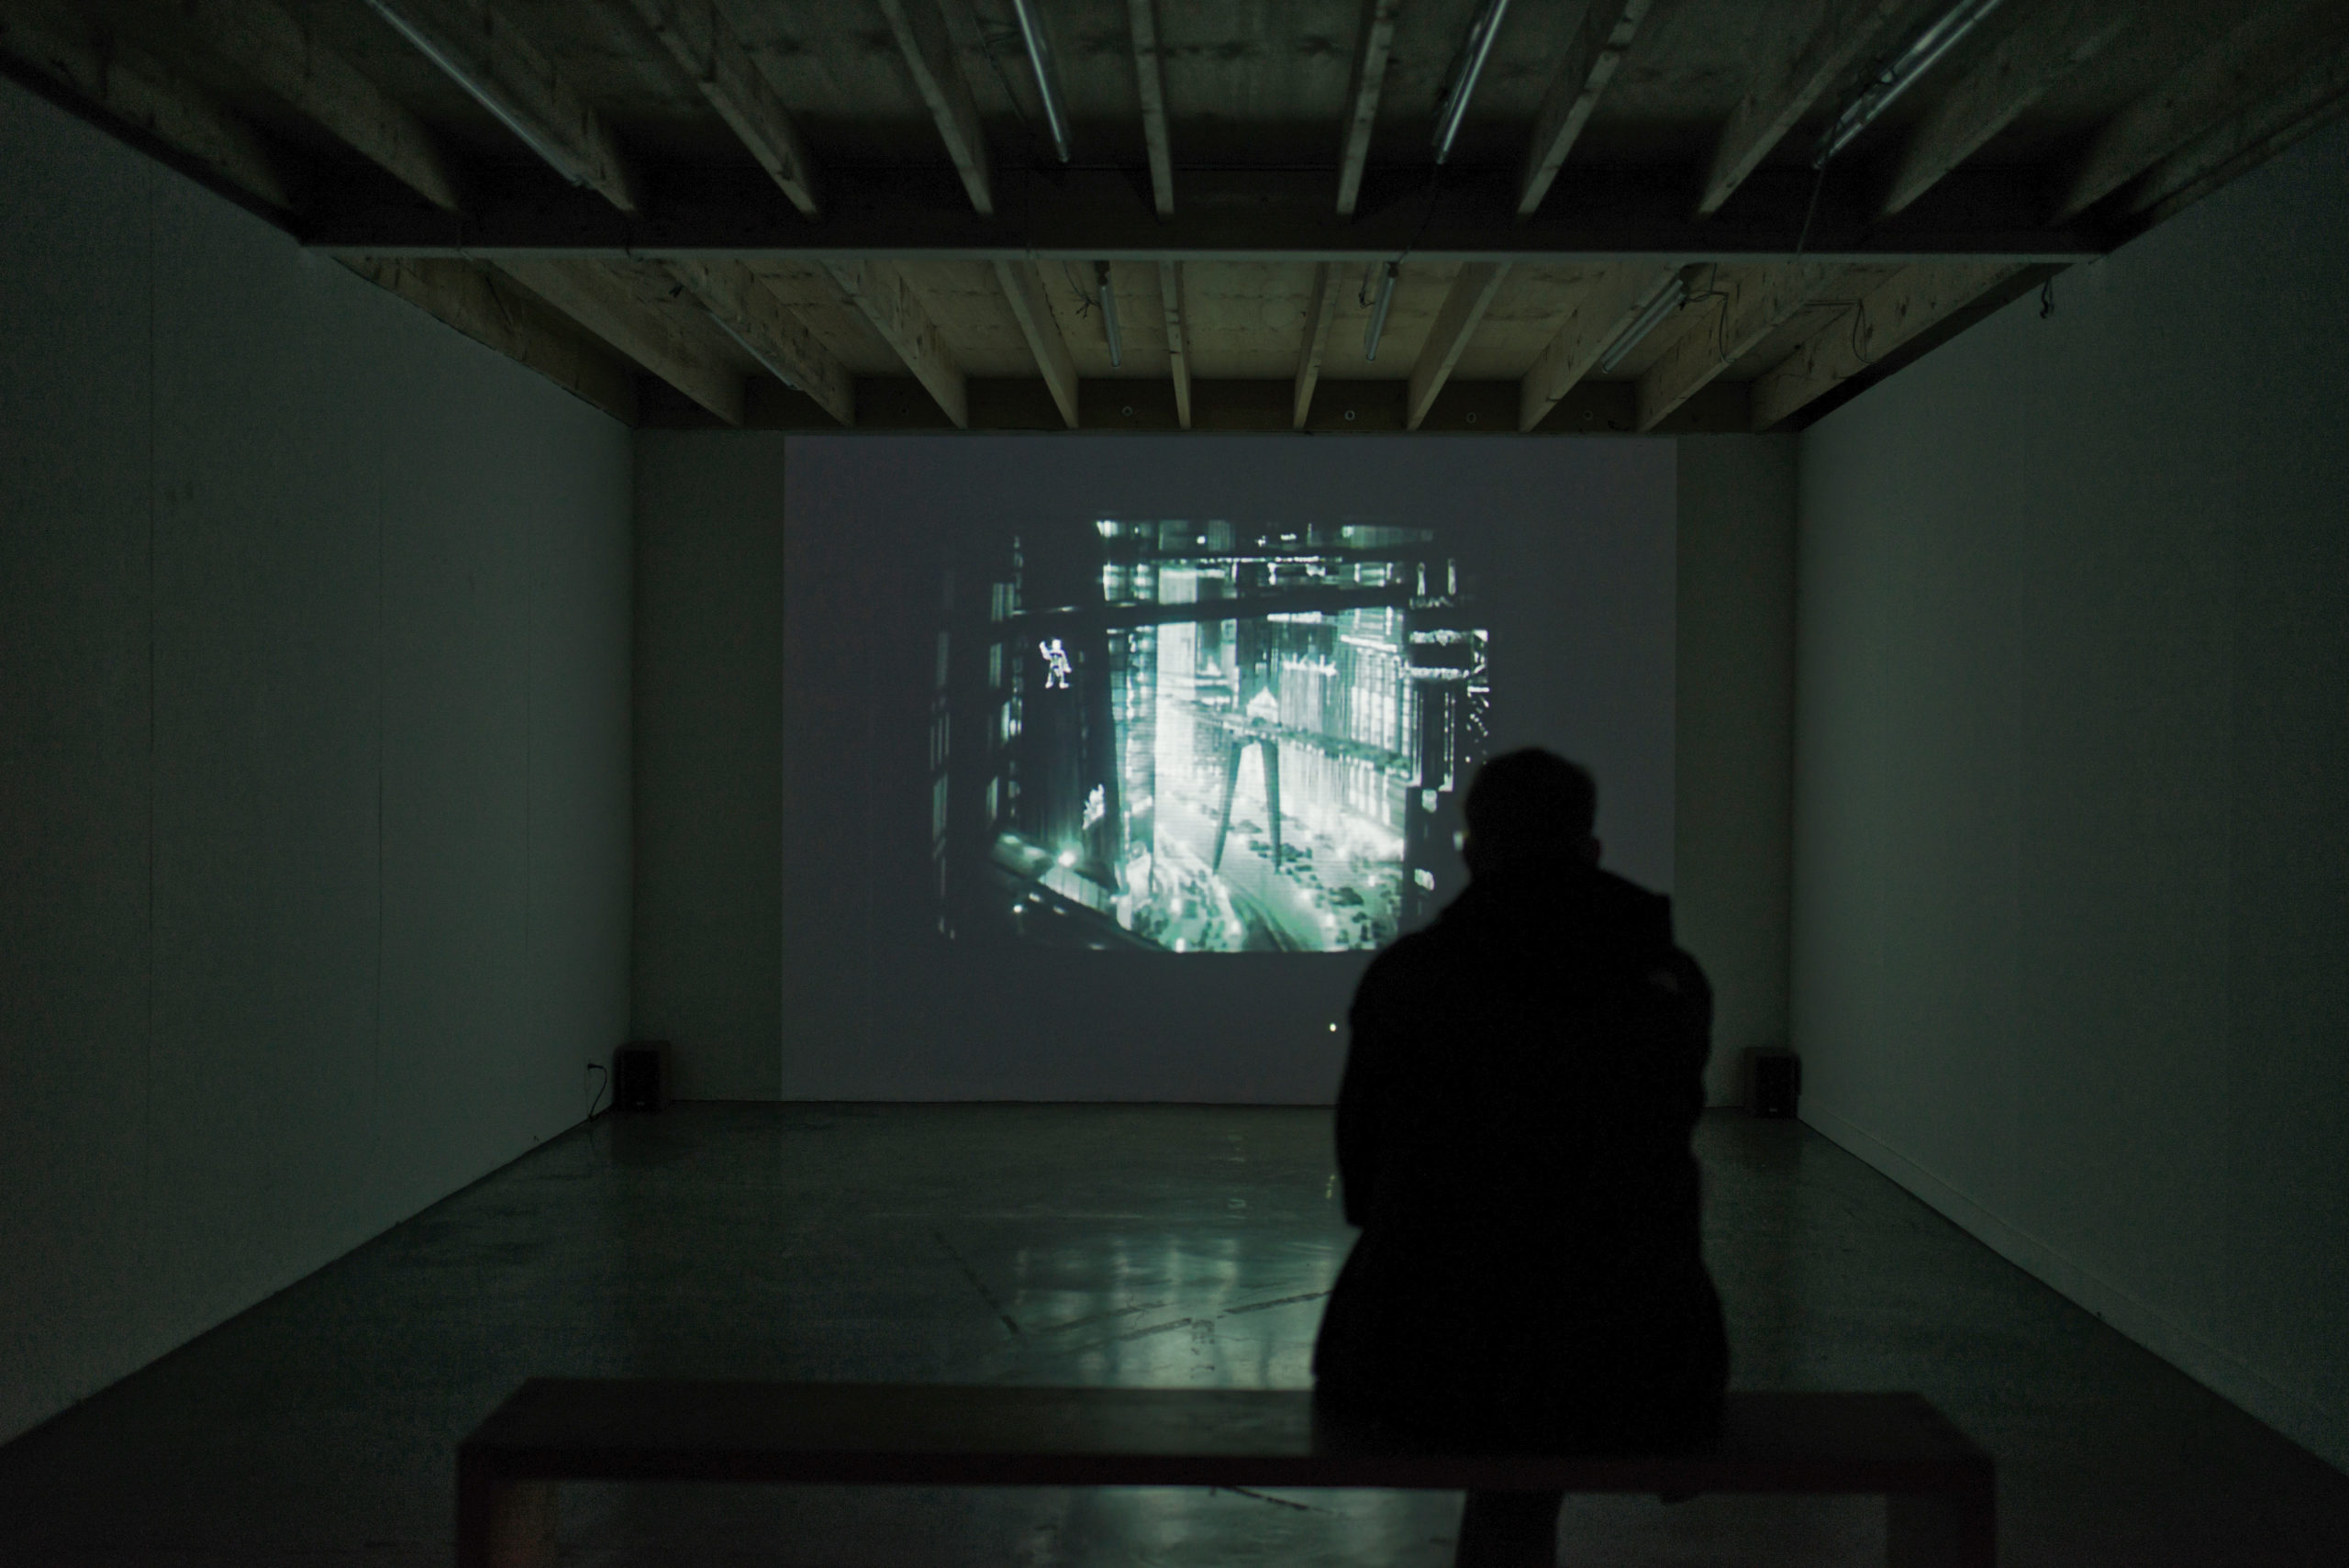 Clemens von Wedemeyer and Maya Schweizer – Metropolis – Report from China, 2004-2006, 42min, installation view, Total Museum of Contemporary Art, Seoul, South Korea